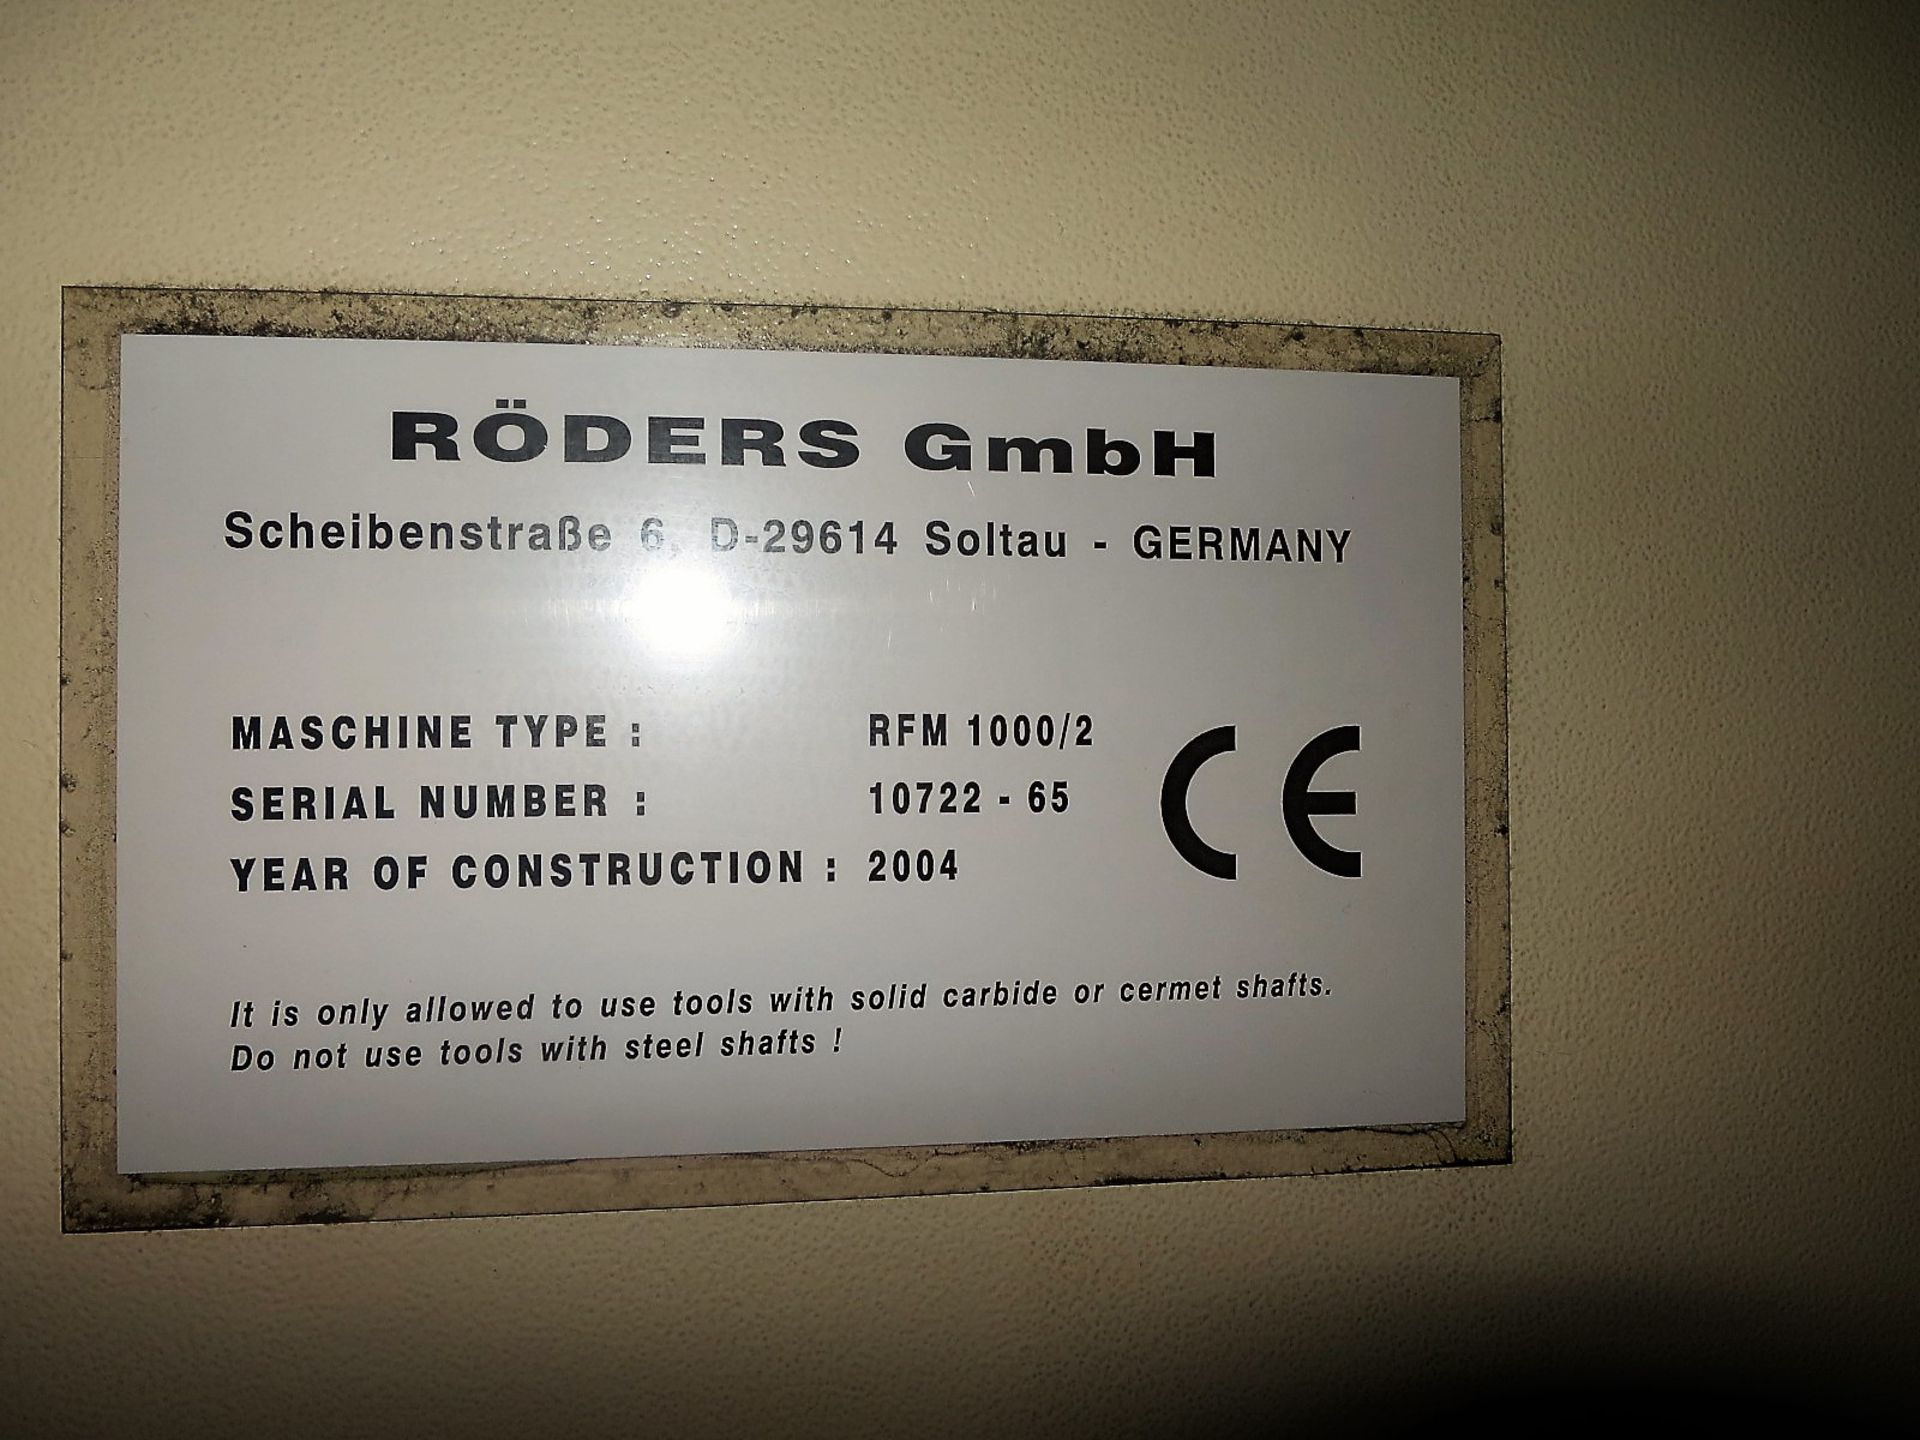 RODERS RFM 1000 HIGH SPEED 3-AXIS CNC VERTICAL MACHINING CENTER, S/N 10722-65, NEW 2004 - Image 11 of 16